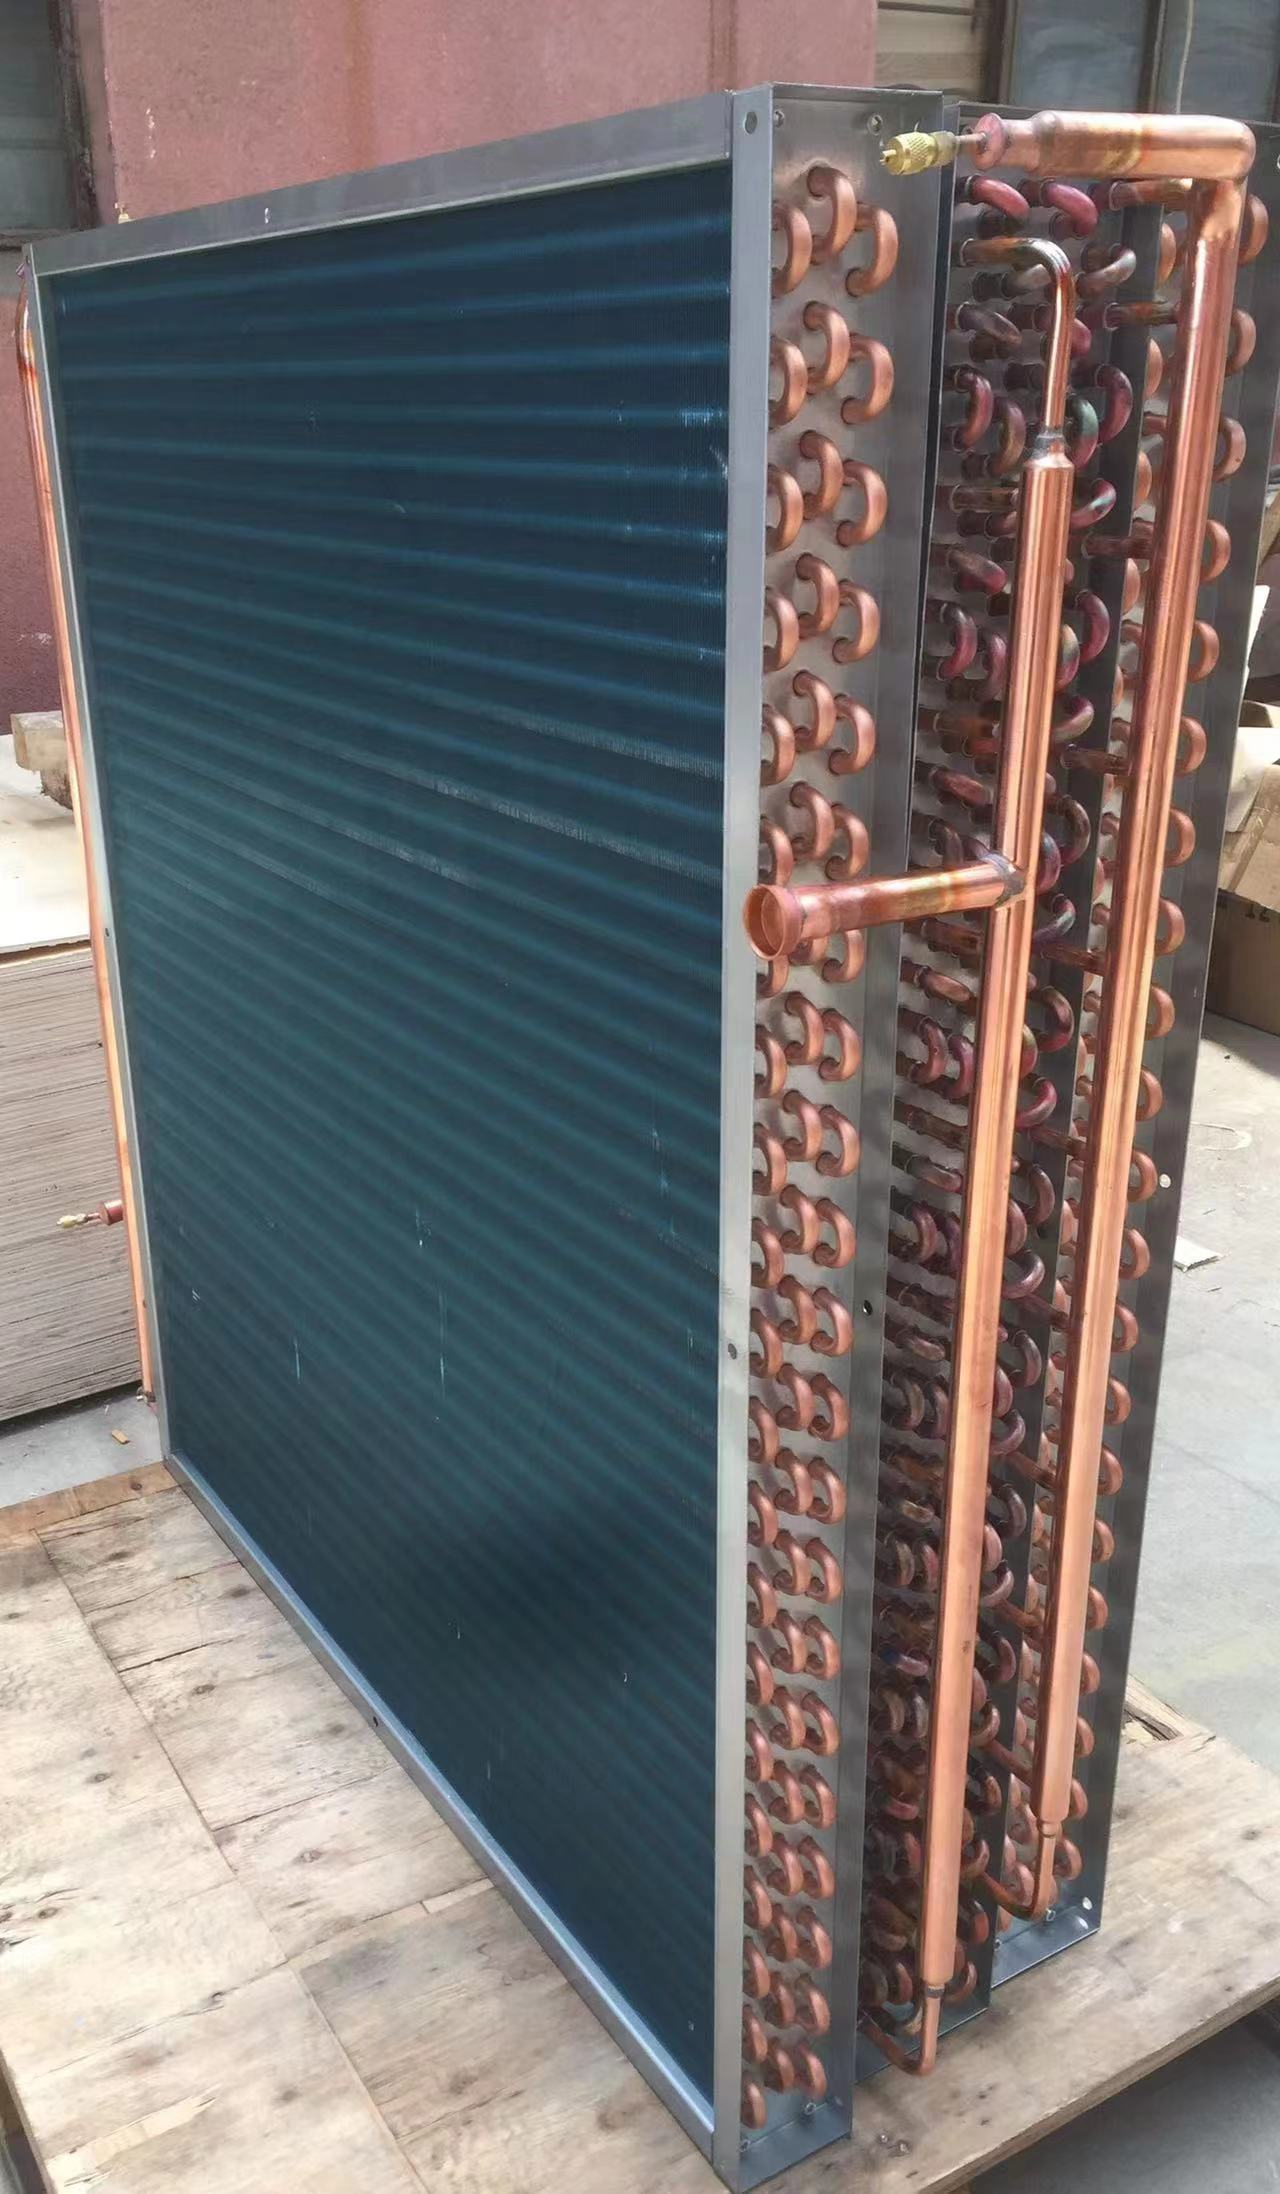 Central air-conditioning heat exchanger